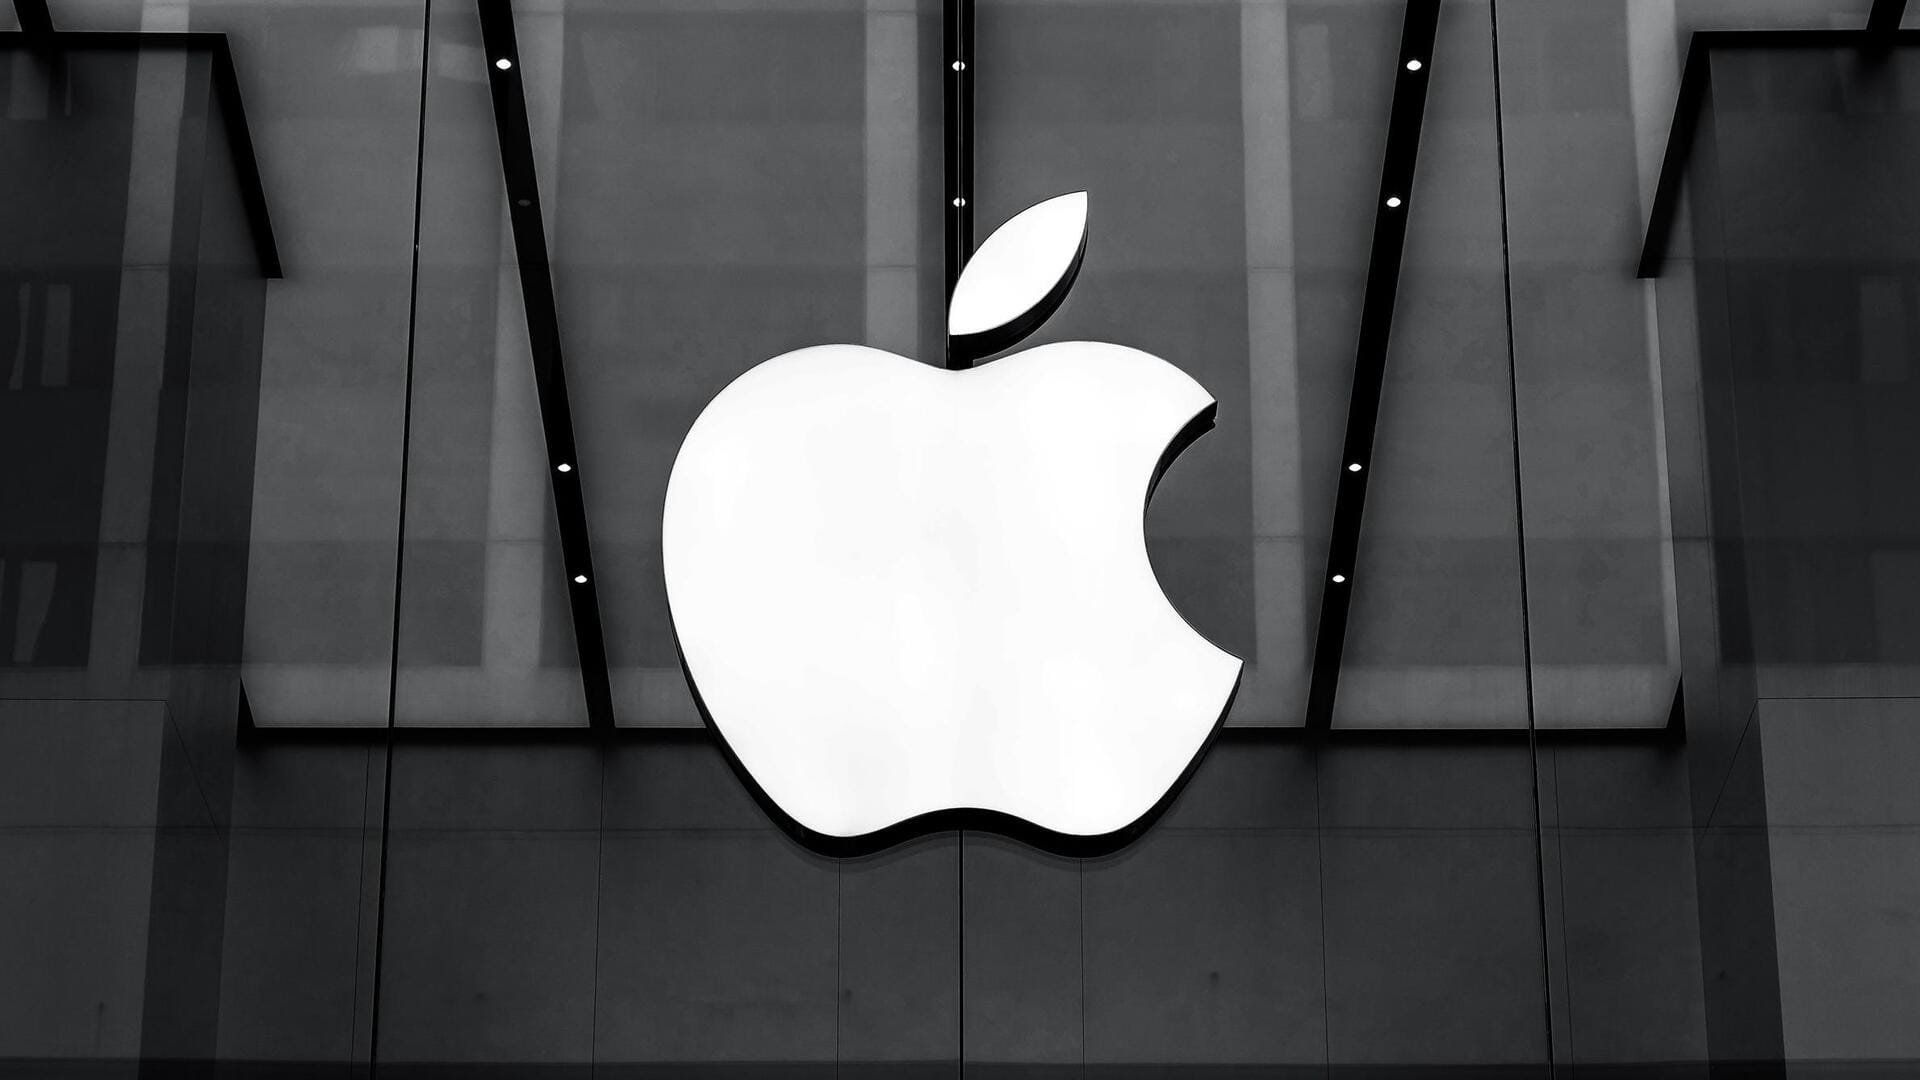 Apple intensifies research initiatives in China amid declining market position